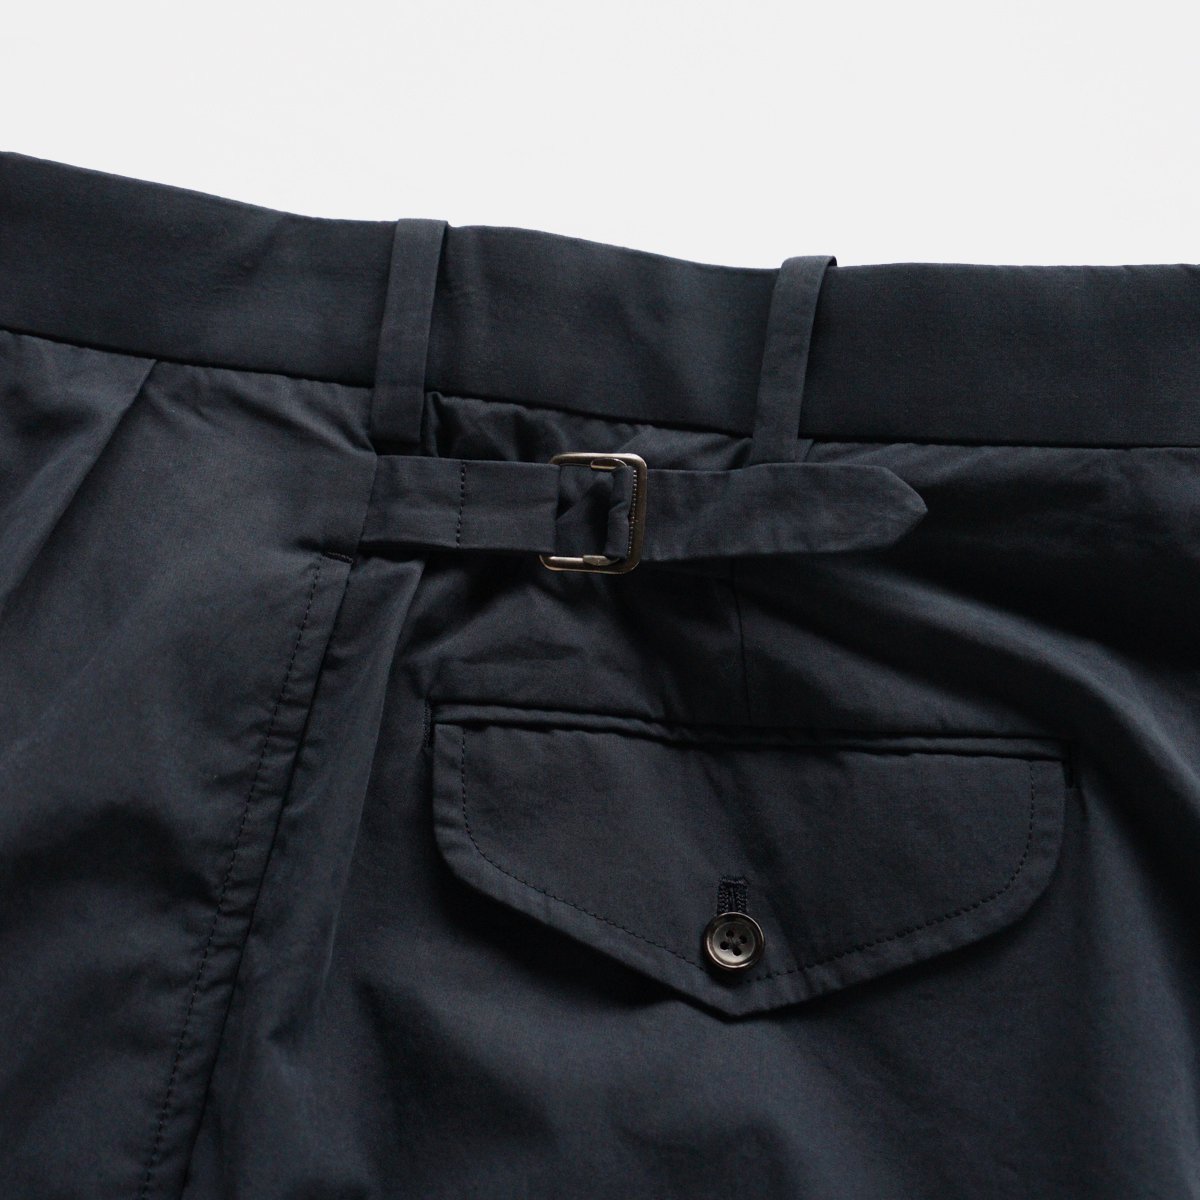 HIGH DENSITY WEATHER CLOTH TROUSERS - 香川県高松市のセレクト ...